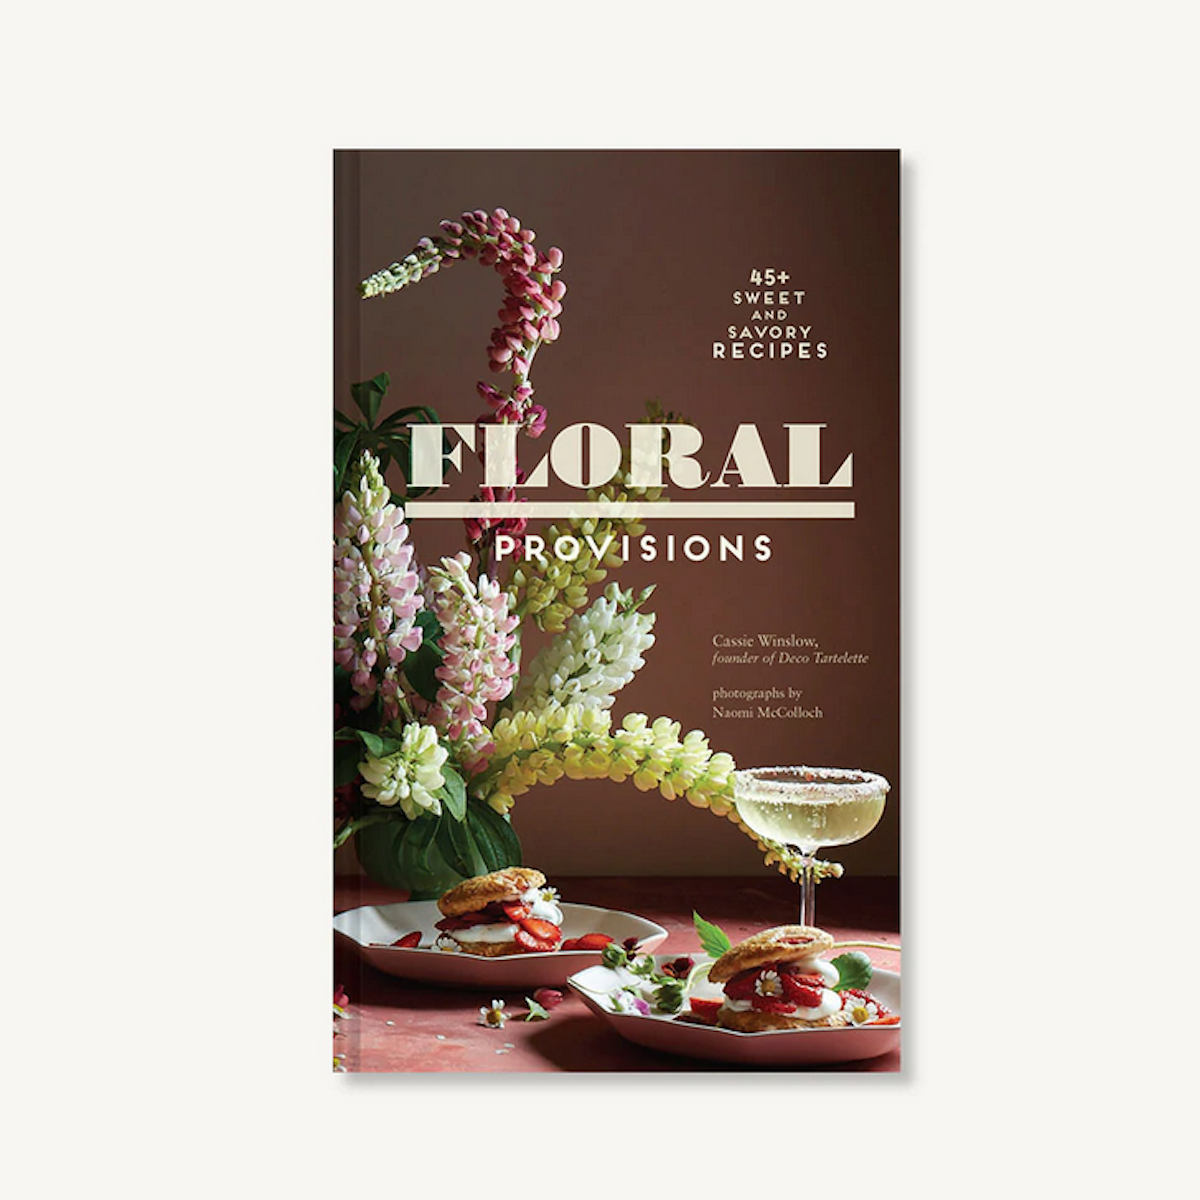 Floral Libations: 41 Frangrant Drinks + Ingredients
Book by Cassie Winslow